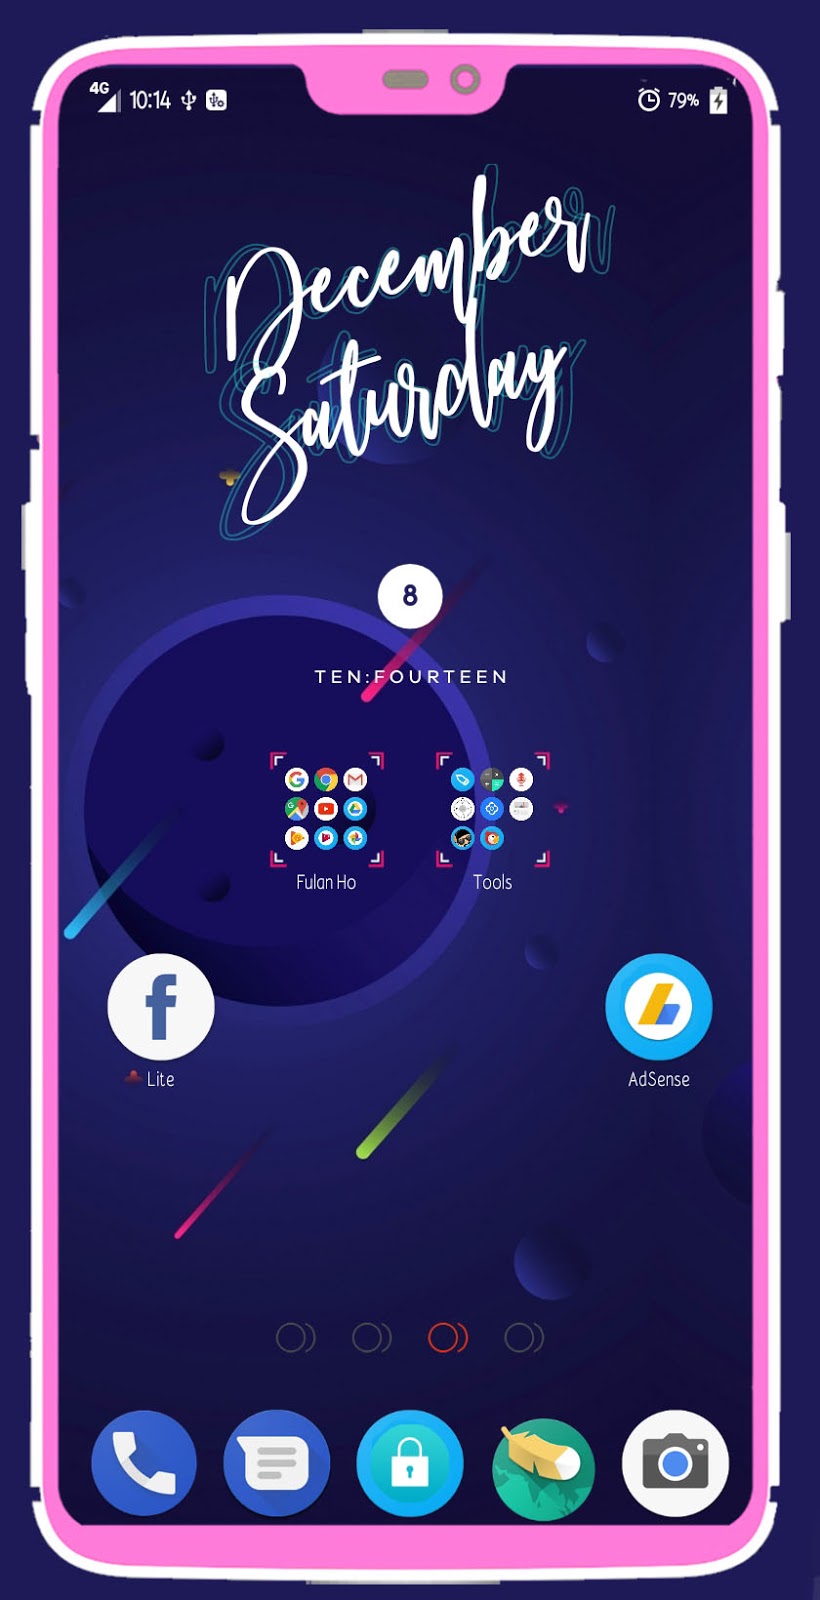 Download theme for android phone